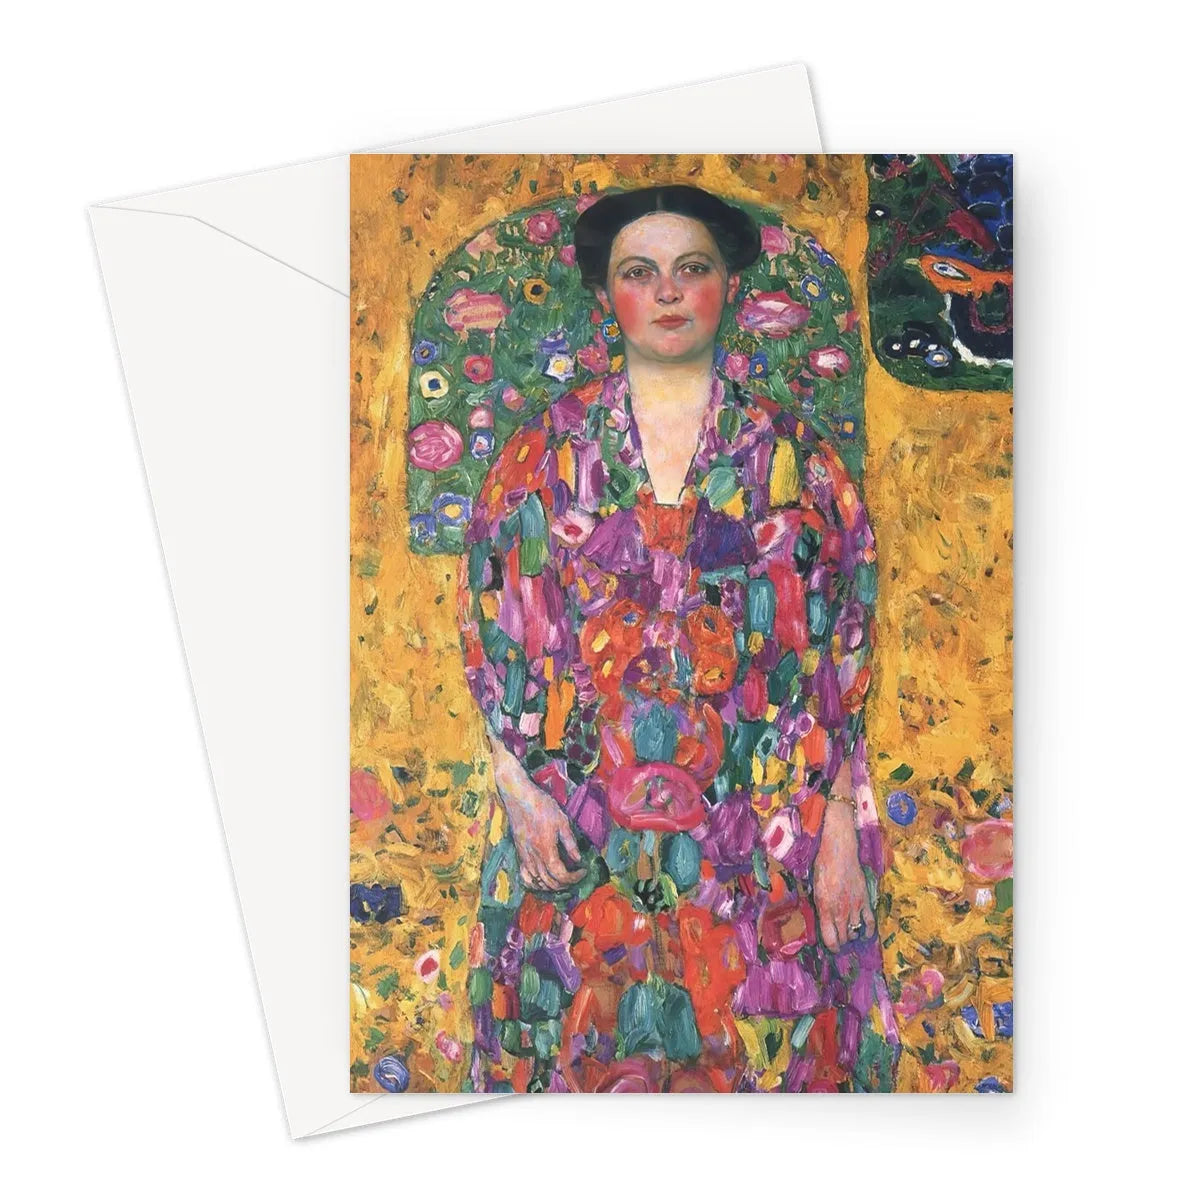 Eugenia Primavesi By Gustav Klimt Greeting Card - A5 Portrait / 1 Card - Greeting & Note Cards - Aesthetic Art